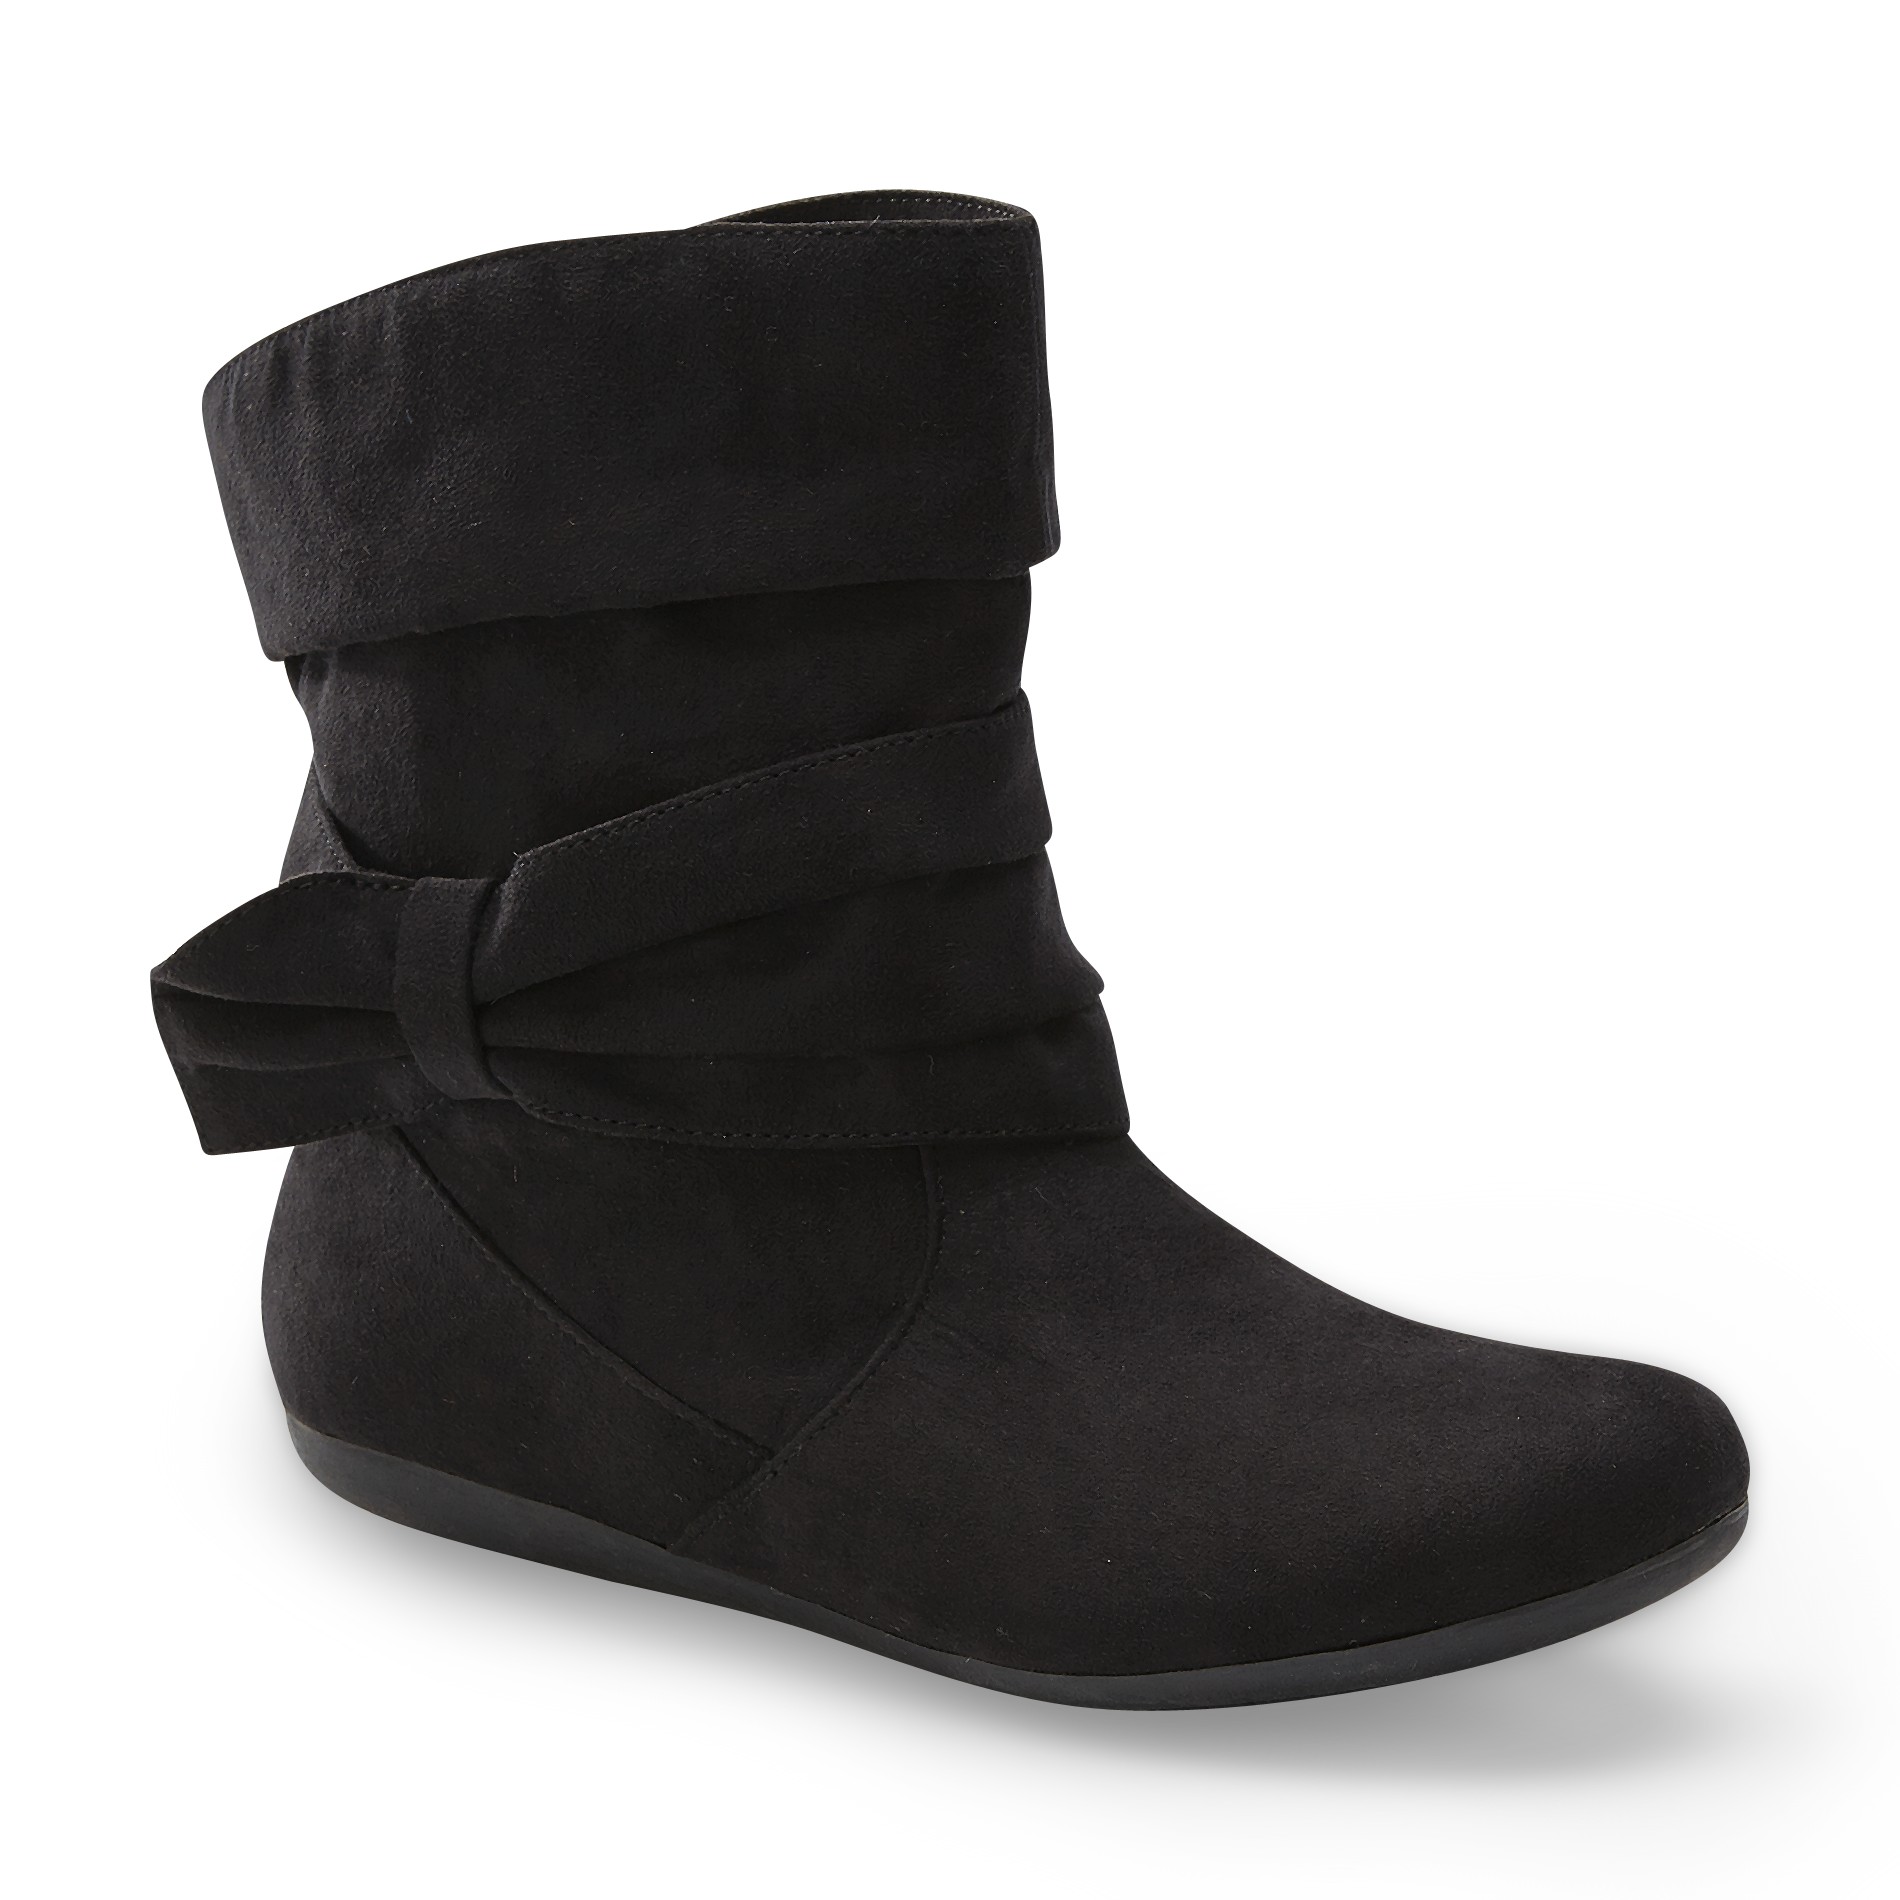 Bongo Women's Clybourne Slouch Ankle Boot - Black